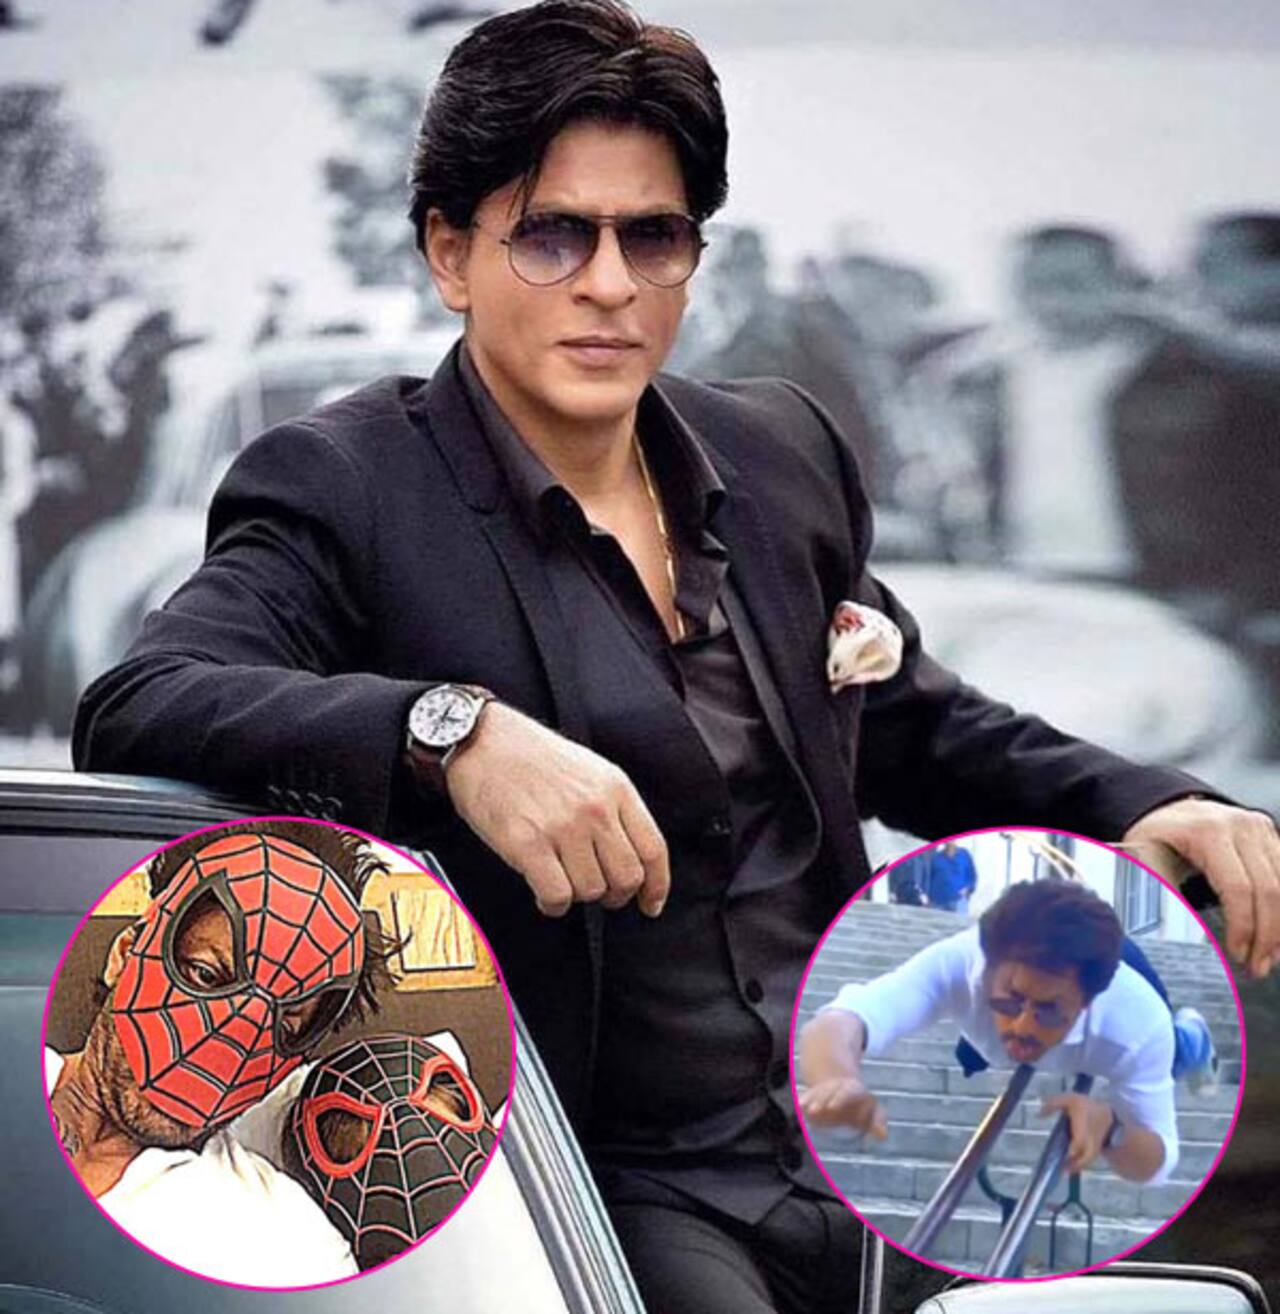 After Spider Man, is Shah Rukh Khan trying to imitate Superman? Watch video!